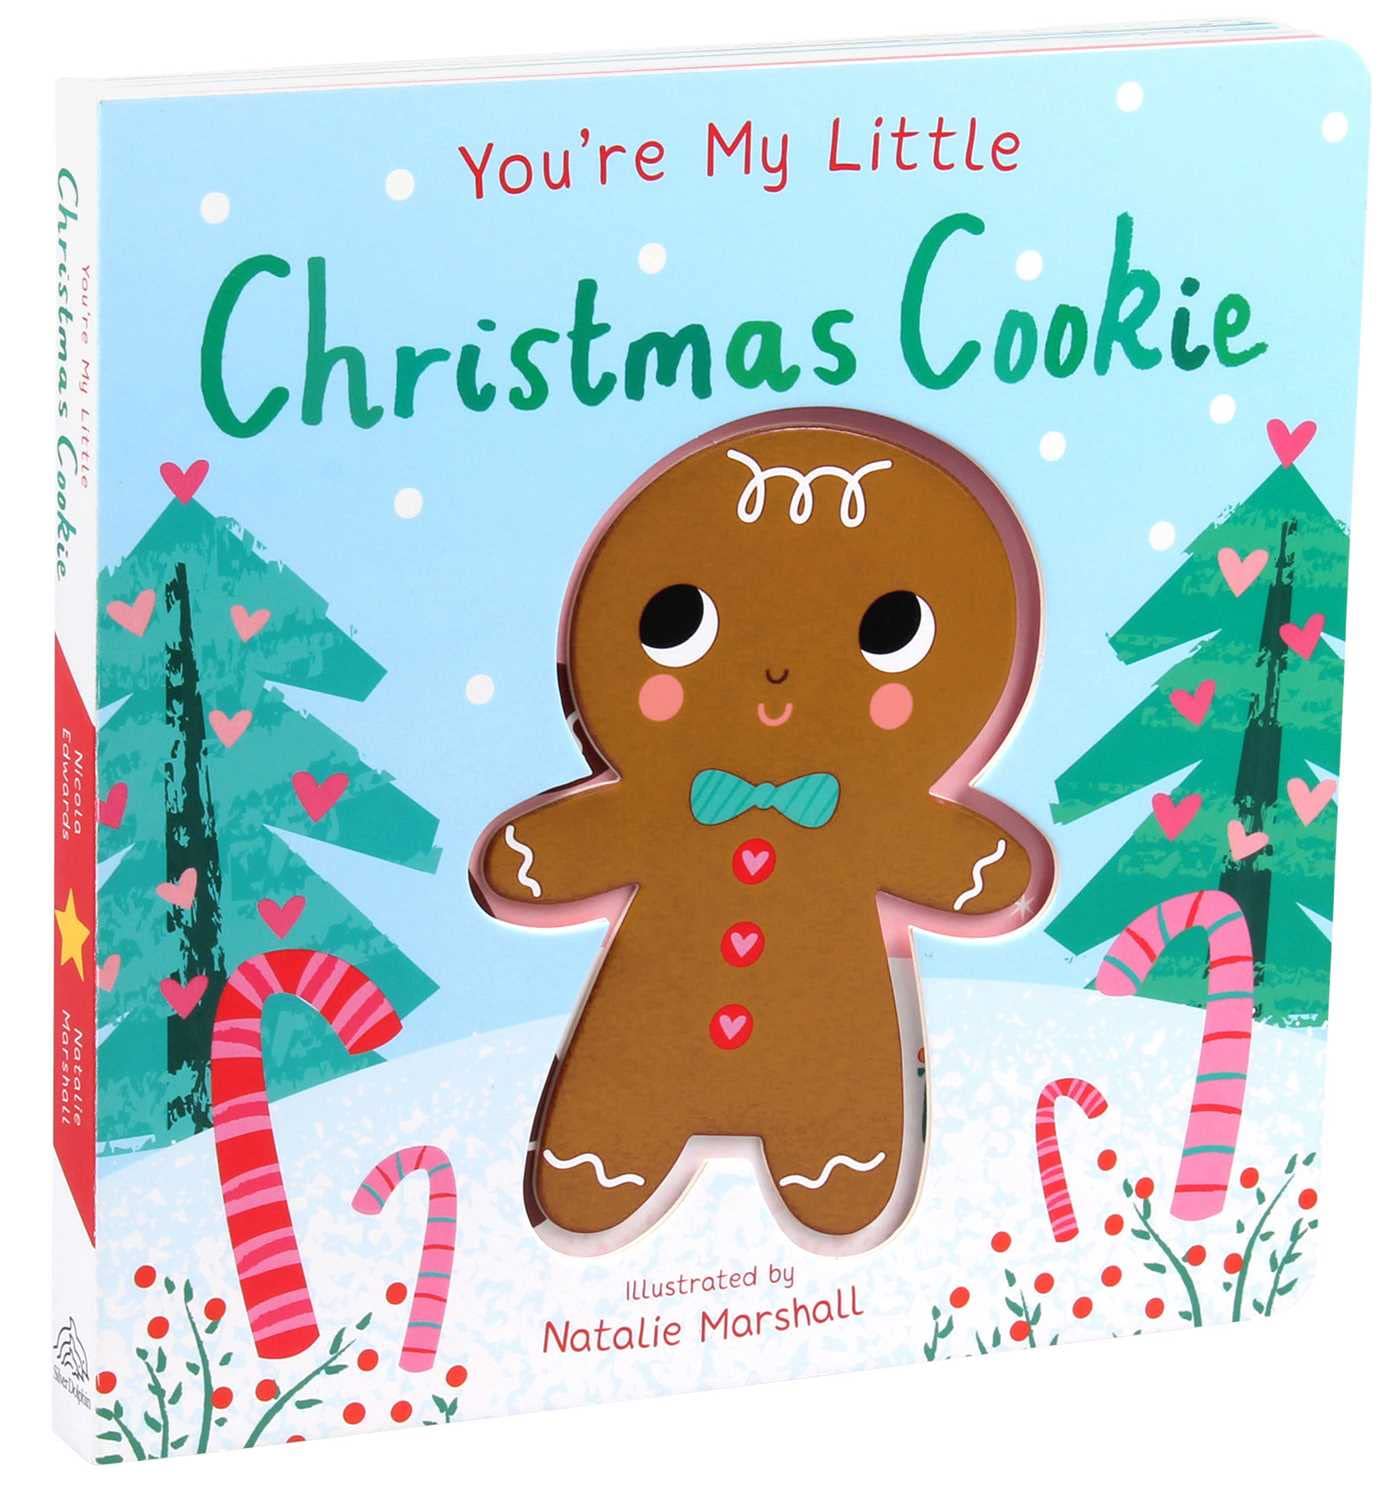 You're My Little Christmas Cookie (Board book w/cut-outs and raised elements) $2  - Free Ship w/Prime